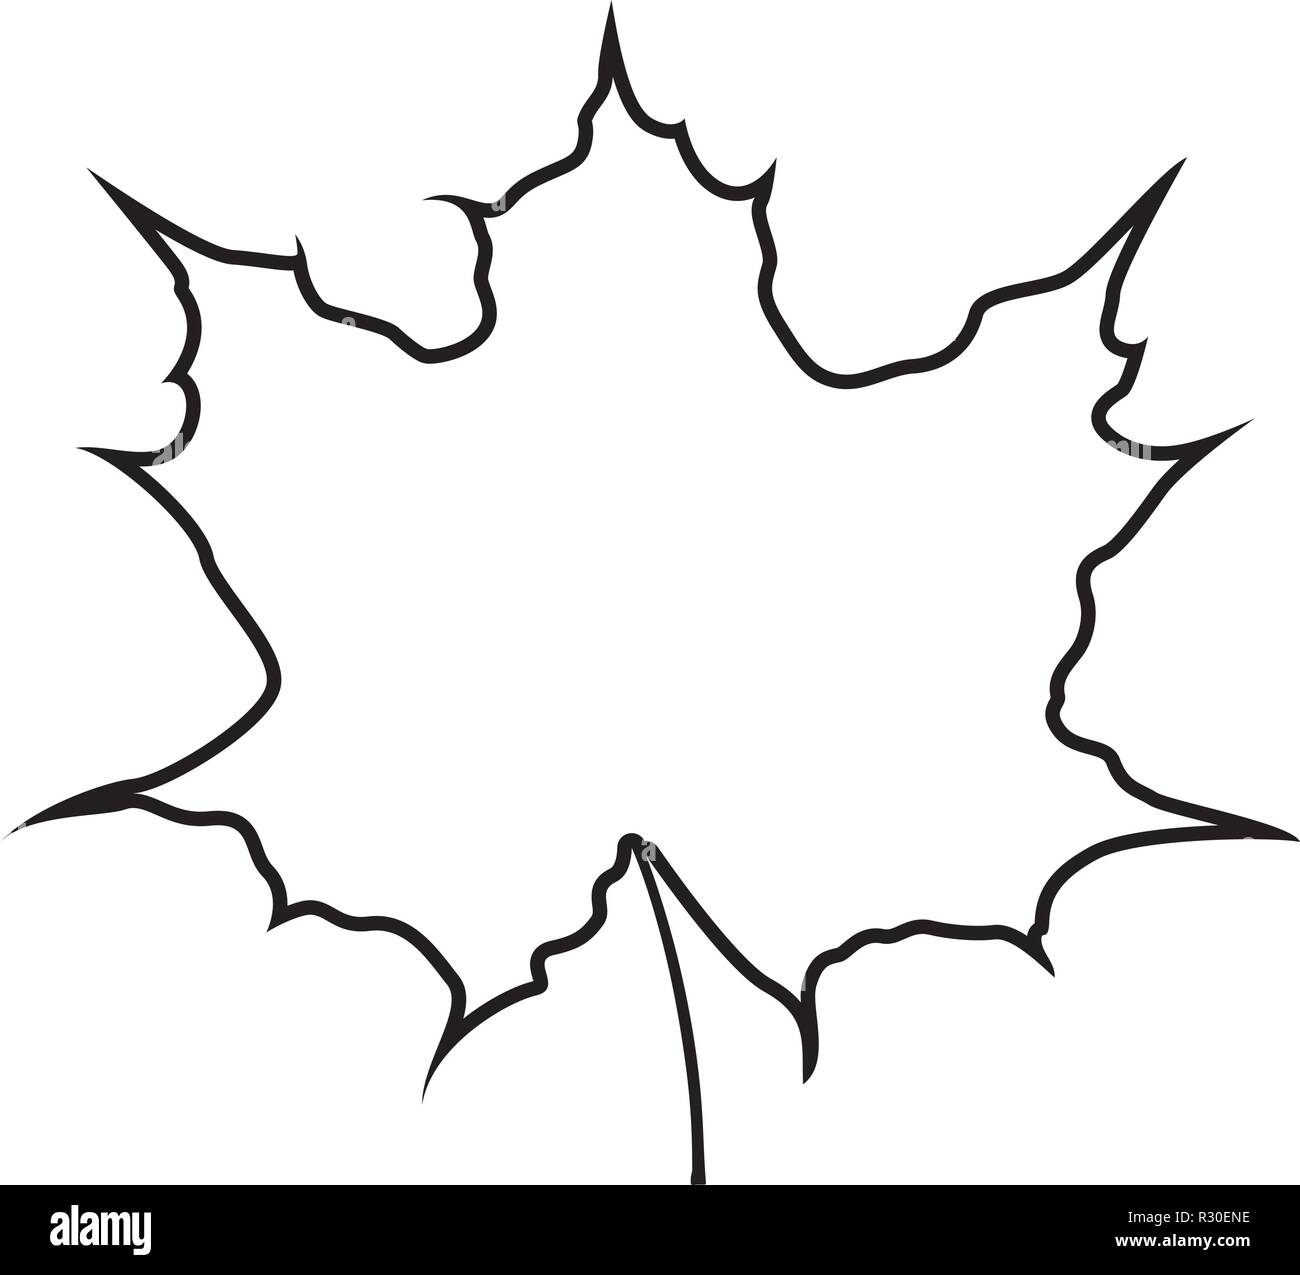 Maple leaf silhouette icon black color vector I flat style simple image outline Stock Vector